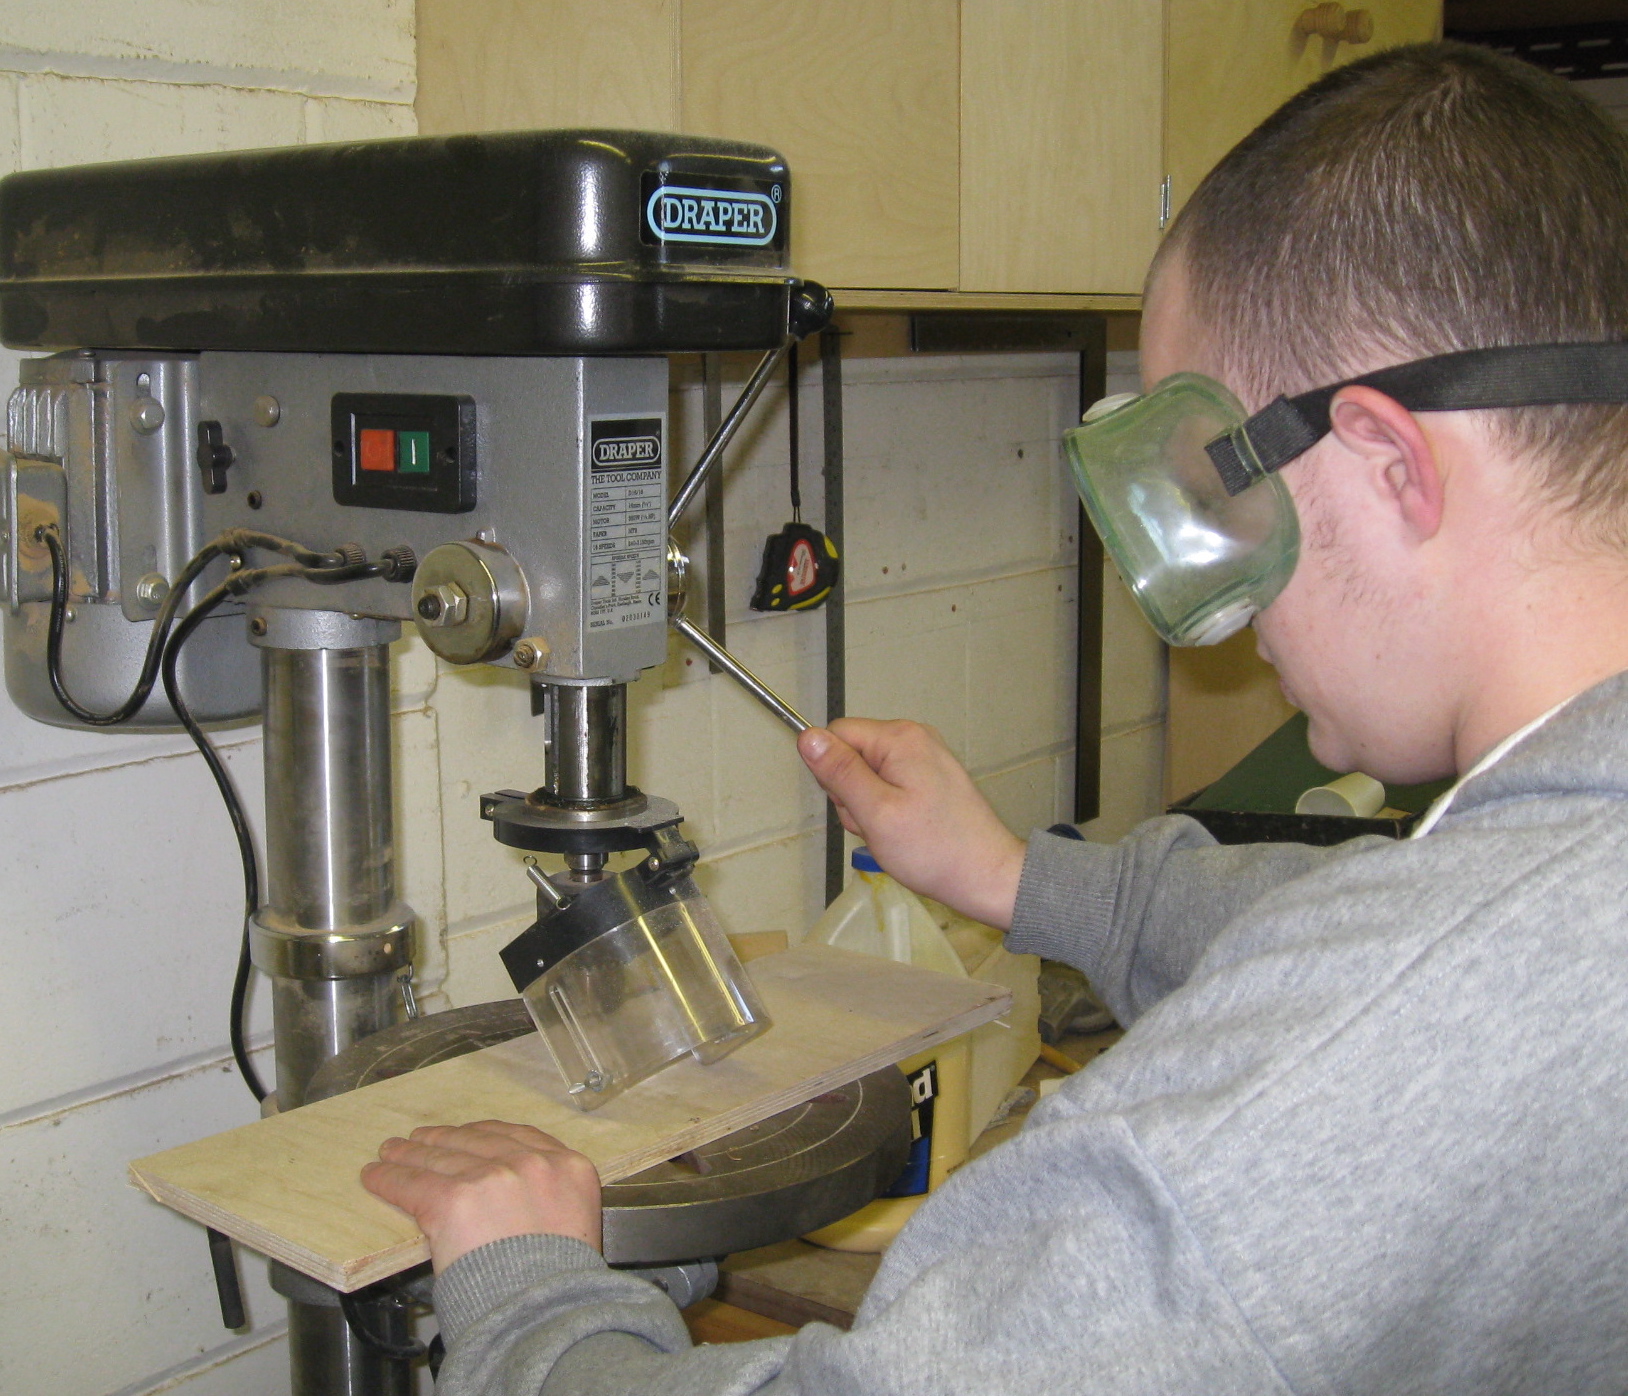 Young person using pillar drill